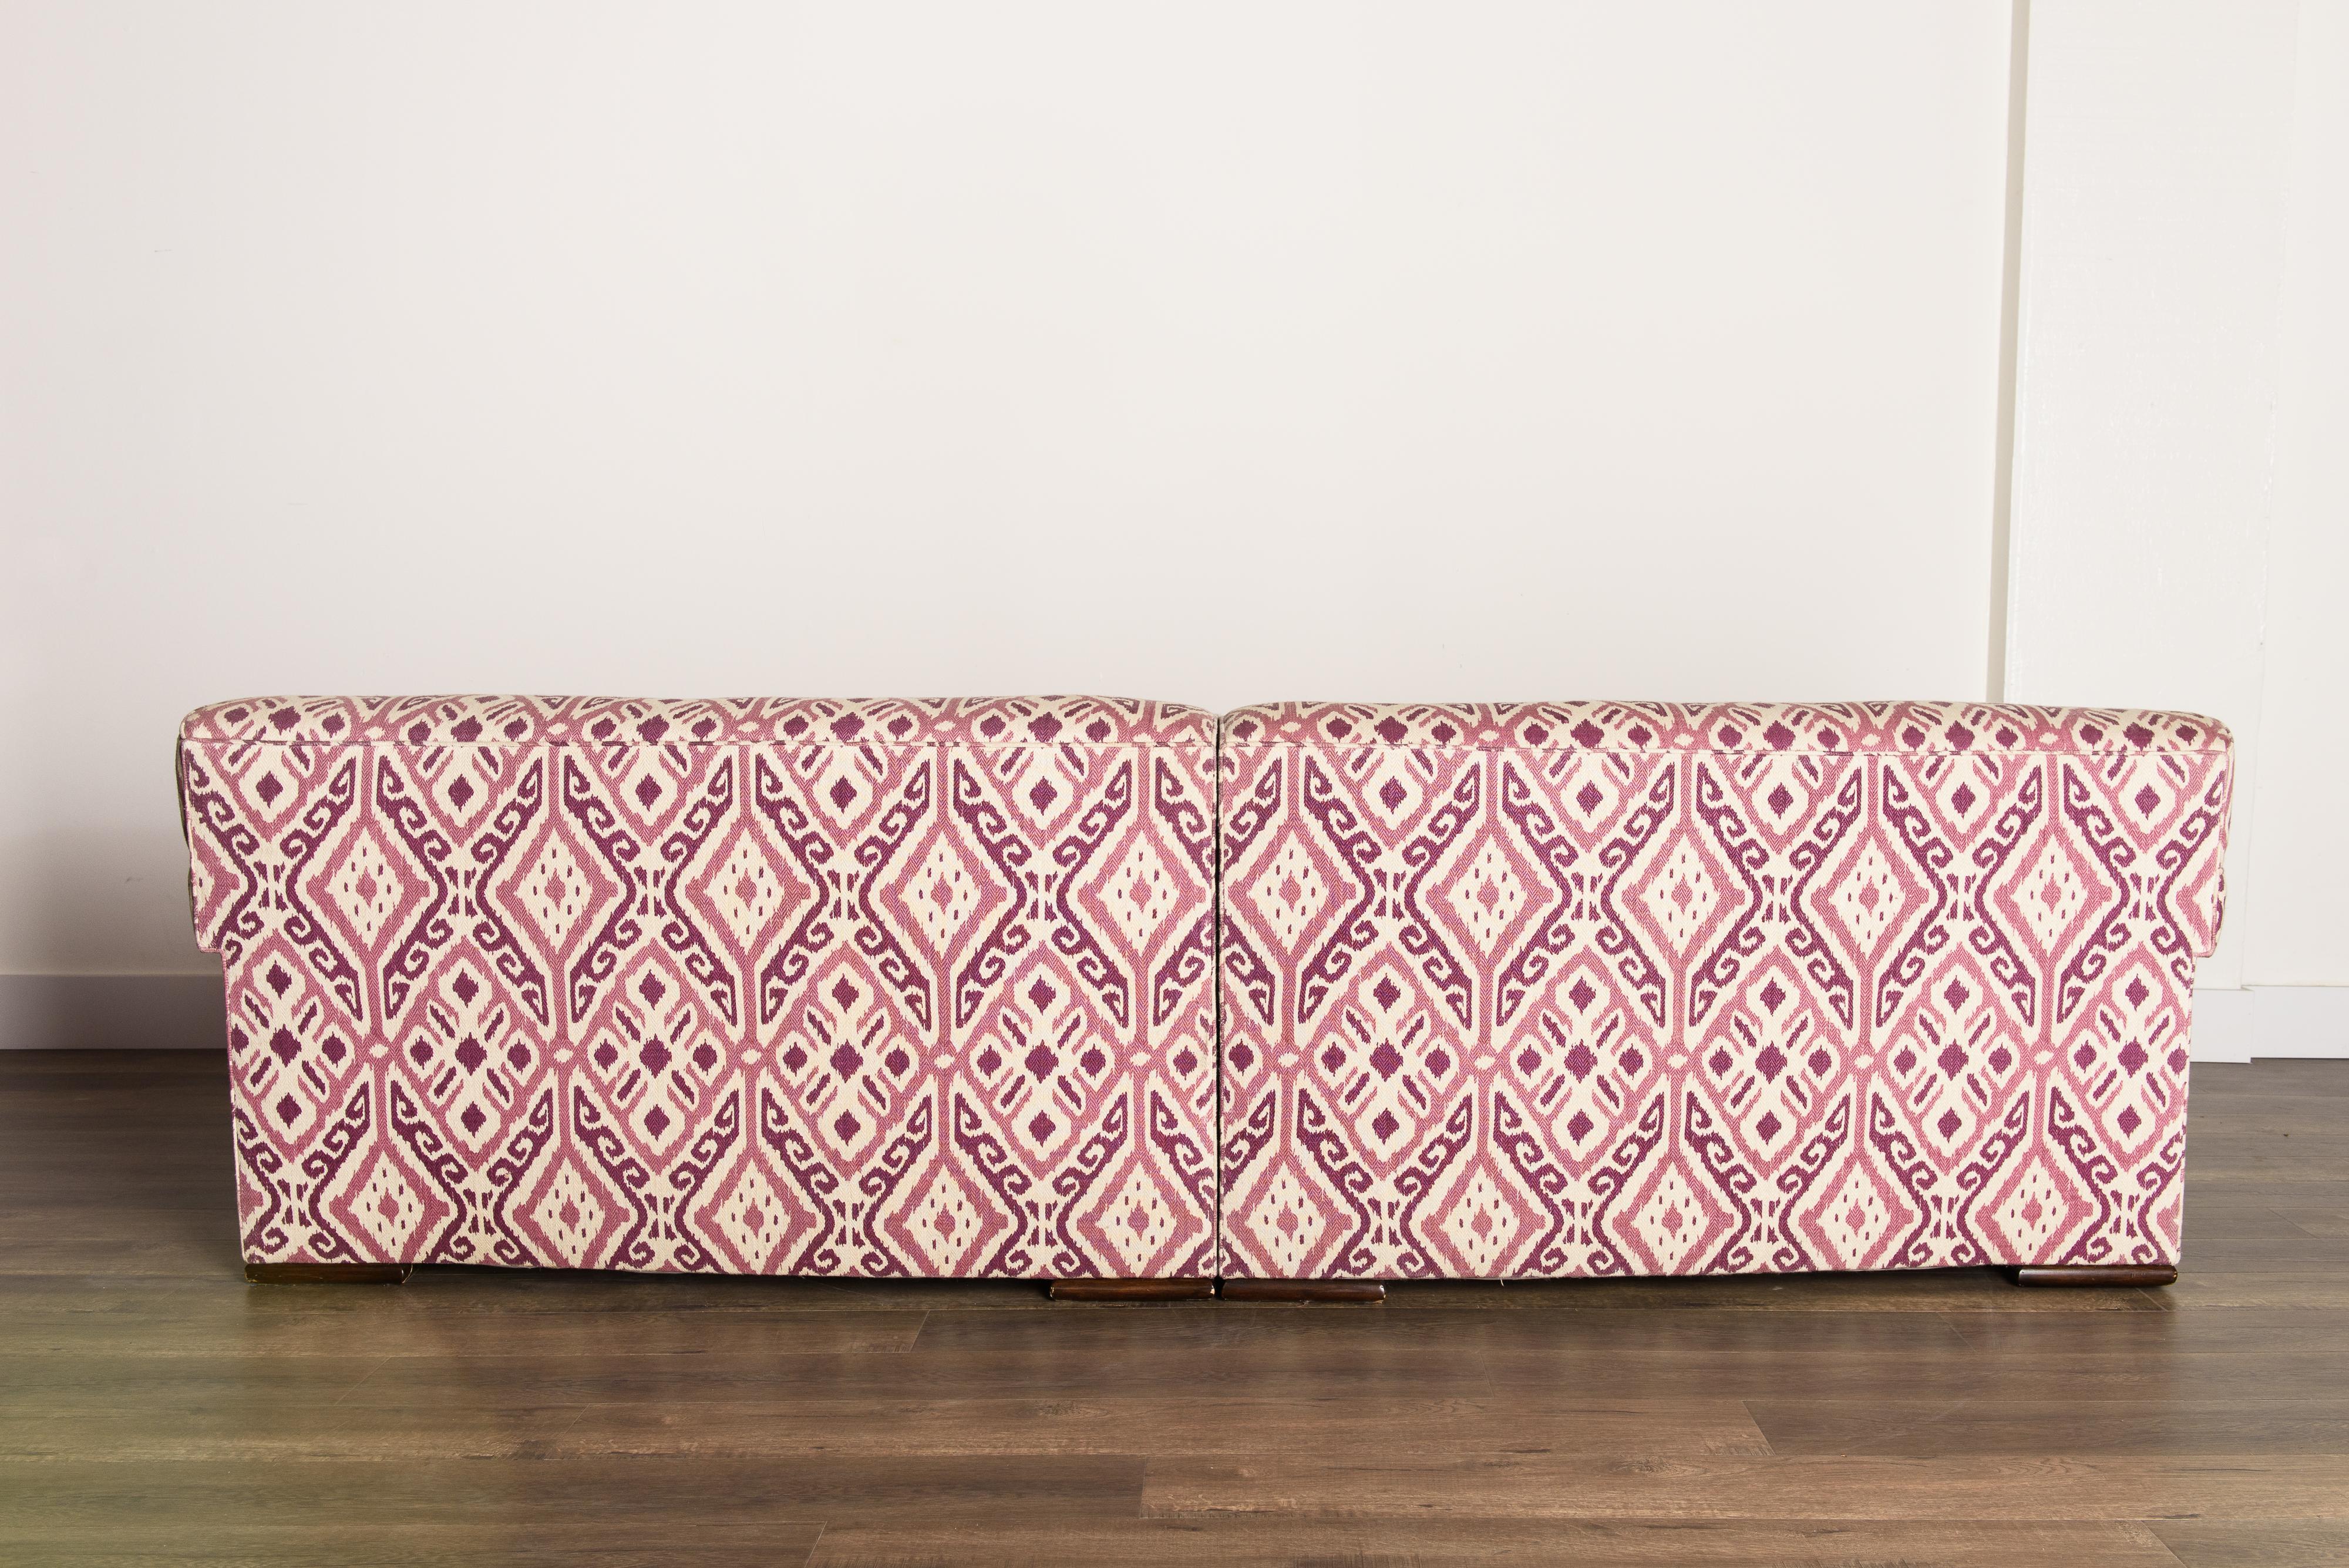 Paul Laszlo Attributed Curved Sectional Sofa Reupholstered in Pink Ikat Fabric For Sale 1